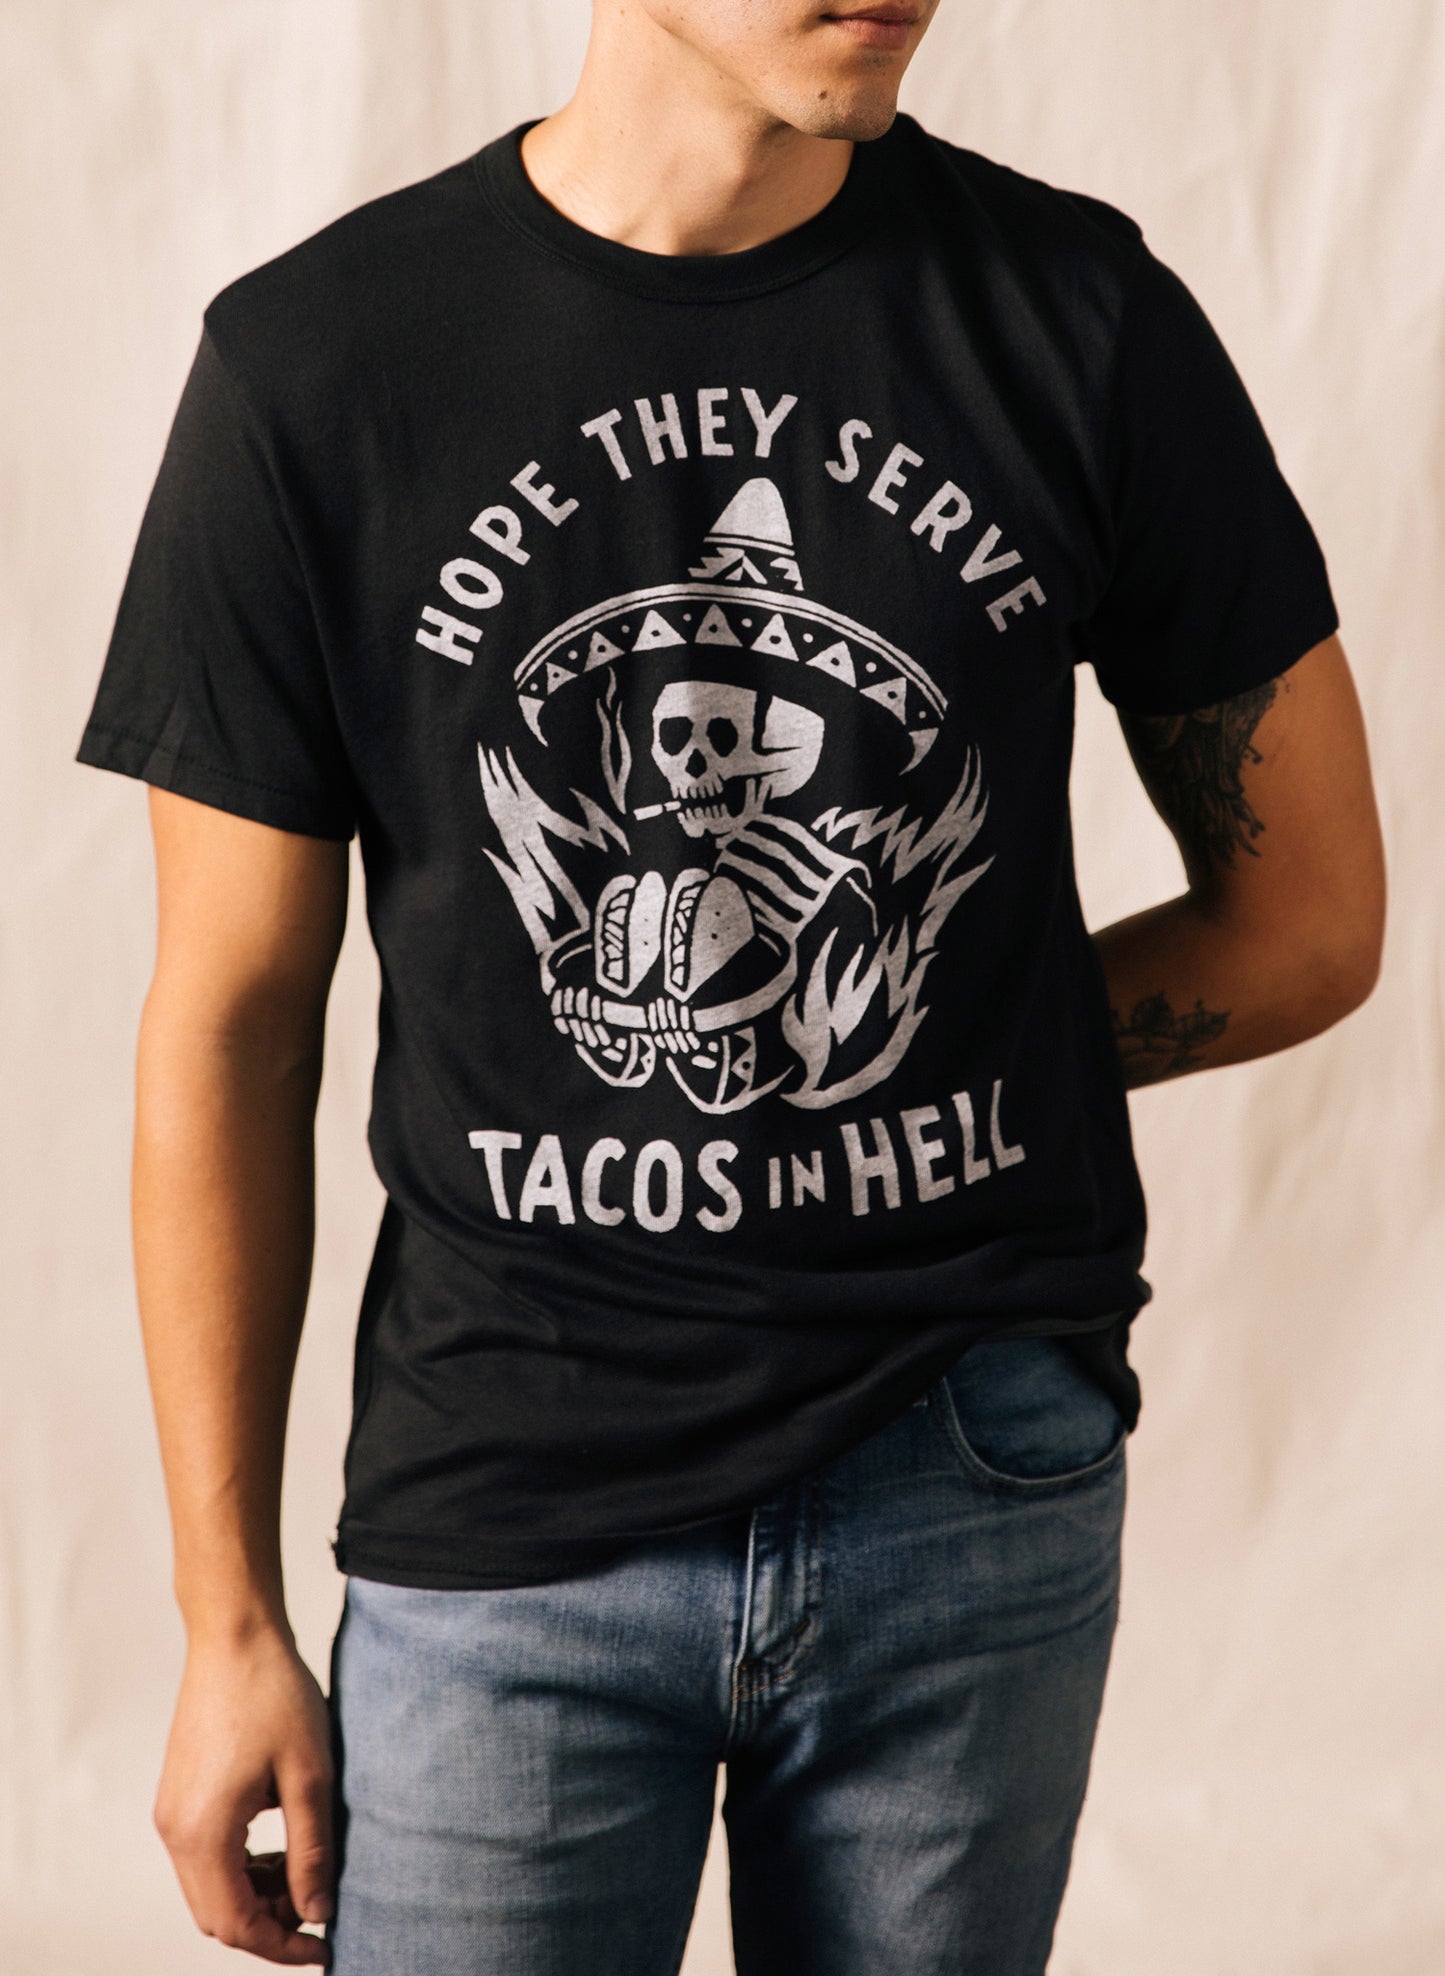 Hope They Serve Tacos in Hell Taco Tuesday Al Pastor Food Tee Foodie T-shirt